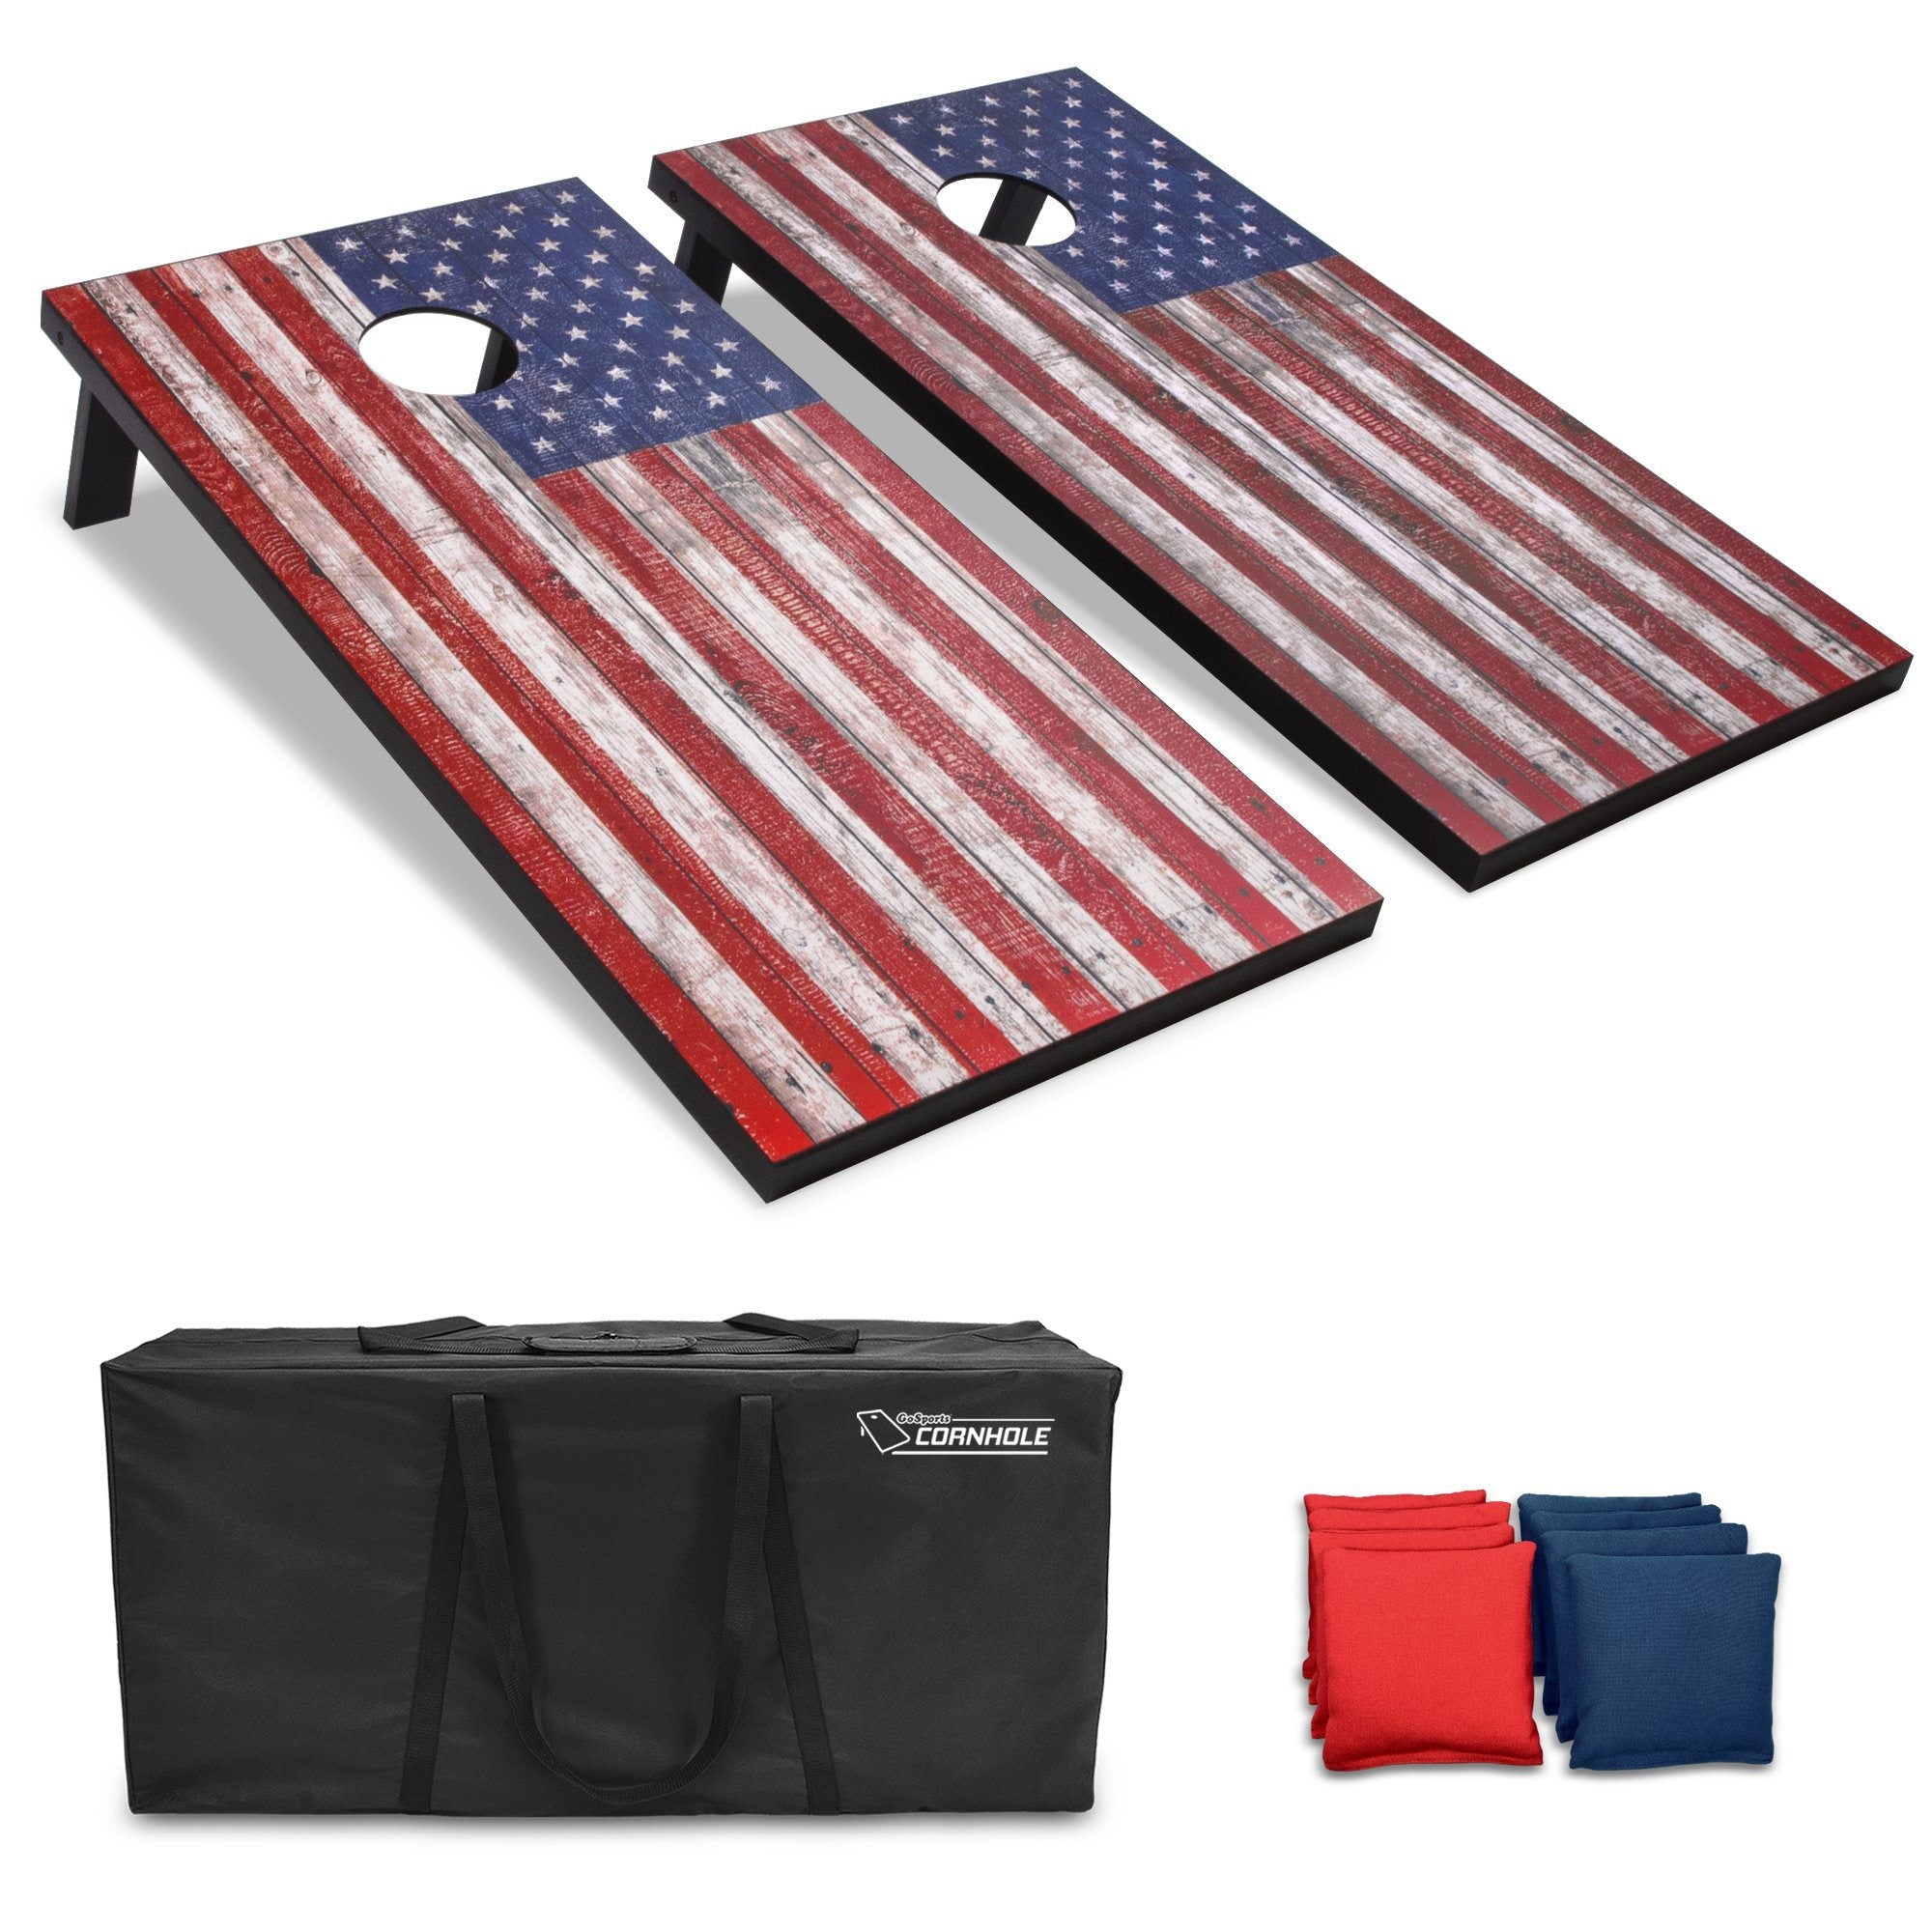 Photo 1 of GoSports American Flag Regulation Size Cornhole Set Includes 8 Bags, Carry Case & Rules, CARRYING CASE RIPPED AND MAJOR CRACK 